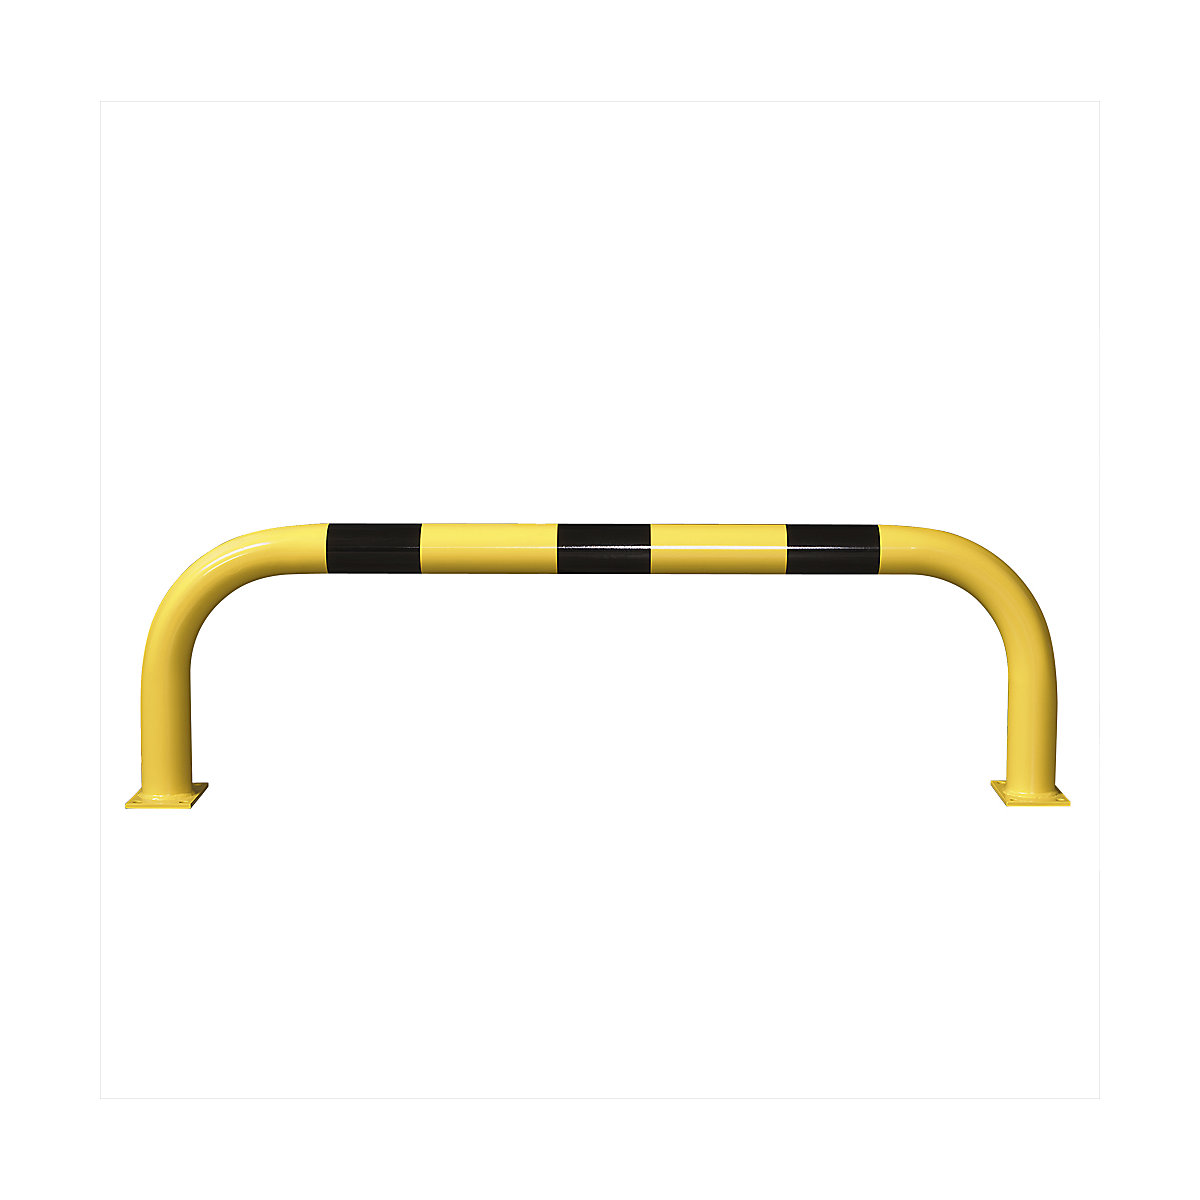 XXL crash protection bar Ø 108 mm, for outdoor use, H x W 600 x 2000 mm